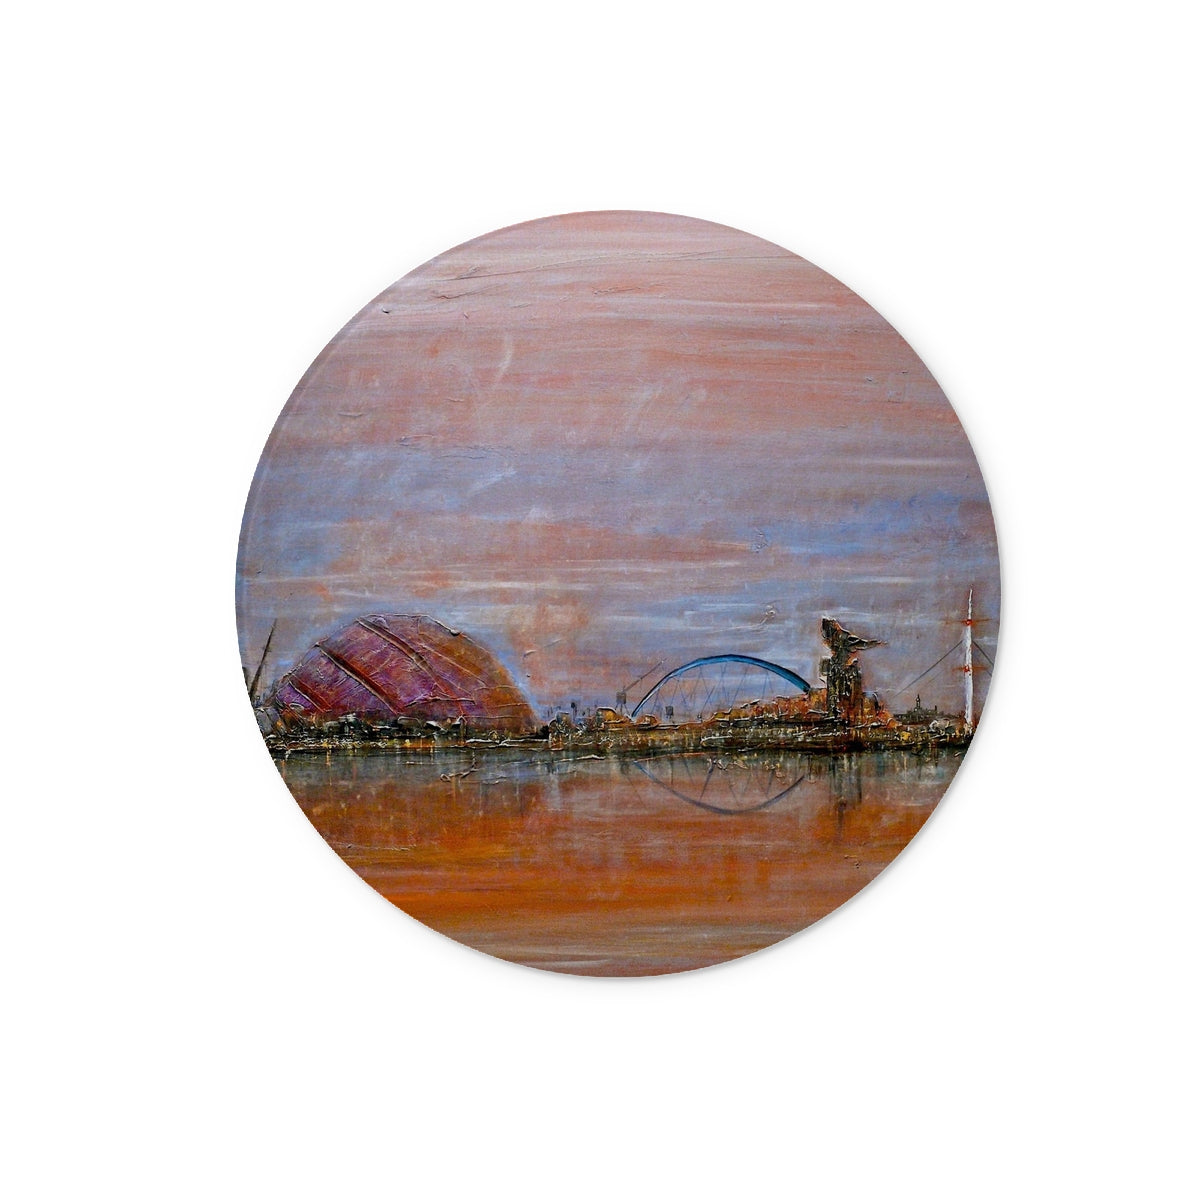 Glasgow Harbour Art Gifts Glass Chopping Board-Glass Chopping Boards-Edinburgh & Glasgow Art Gallery-12" Round-Paintings, Prints, Homeware, Art Gifts From Scotland By Scottish Artist Kevin Hunter